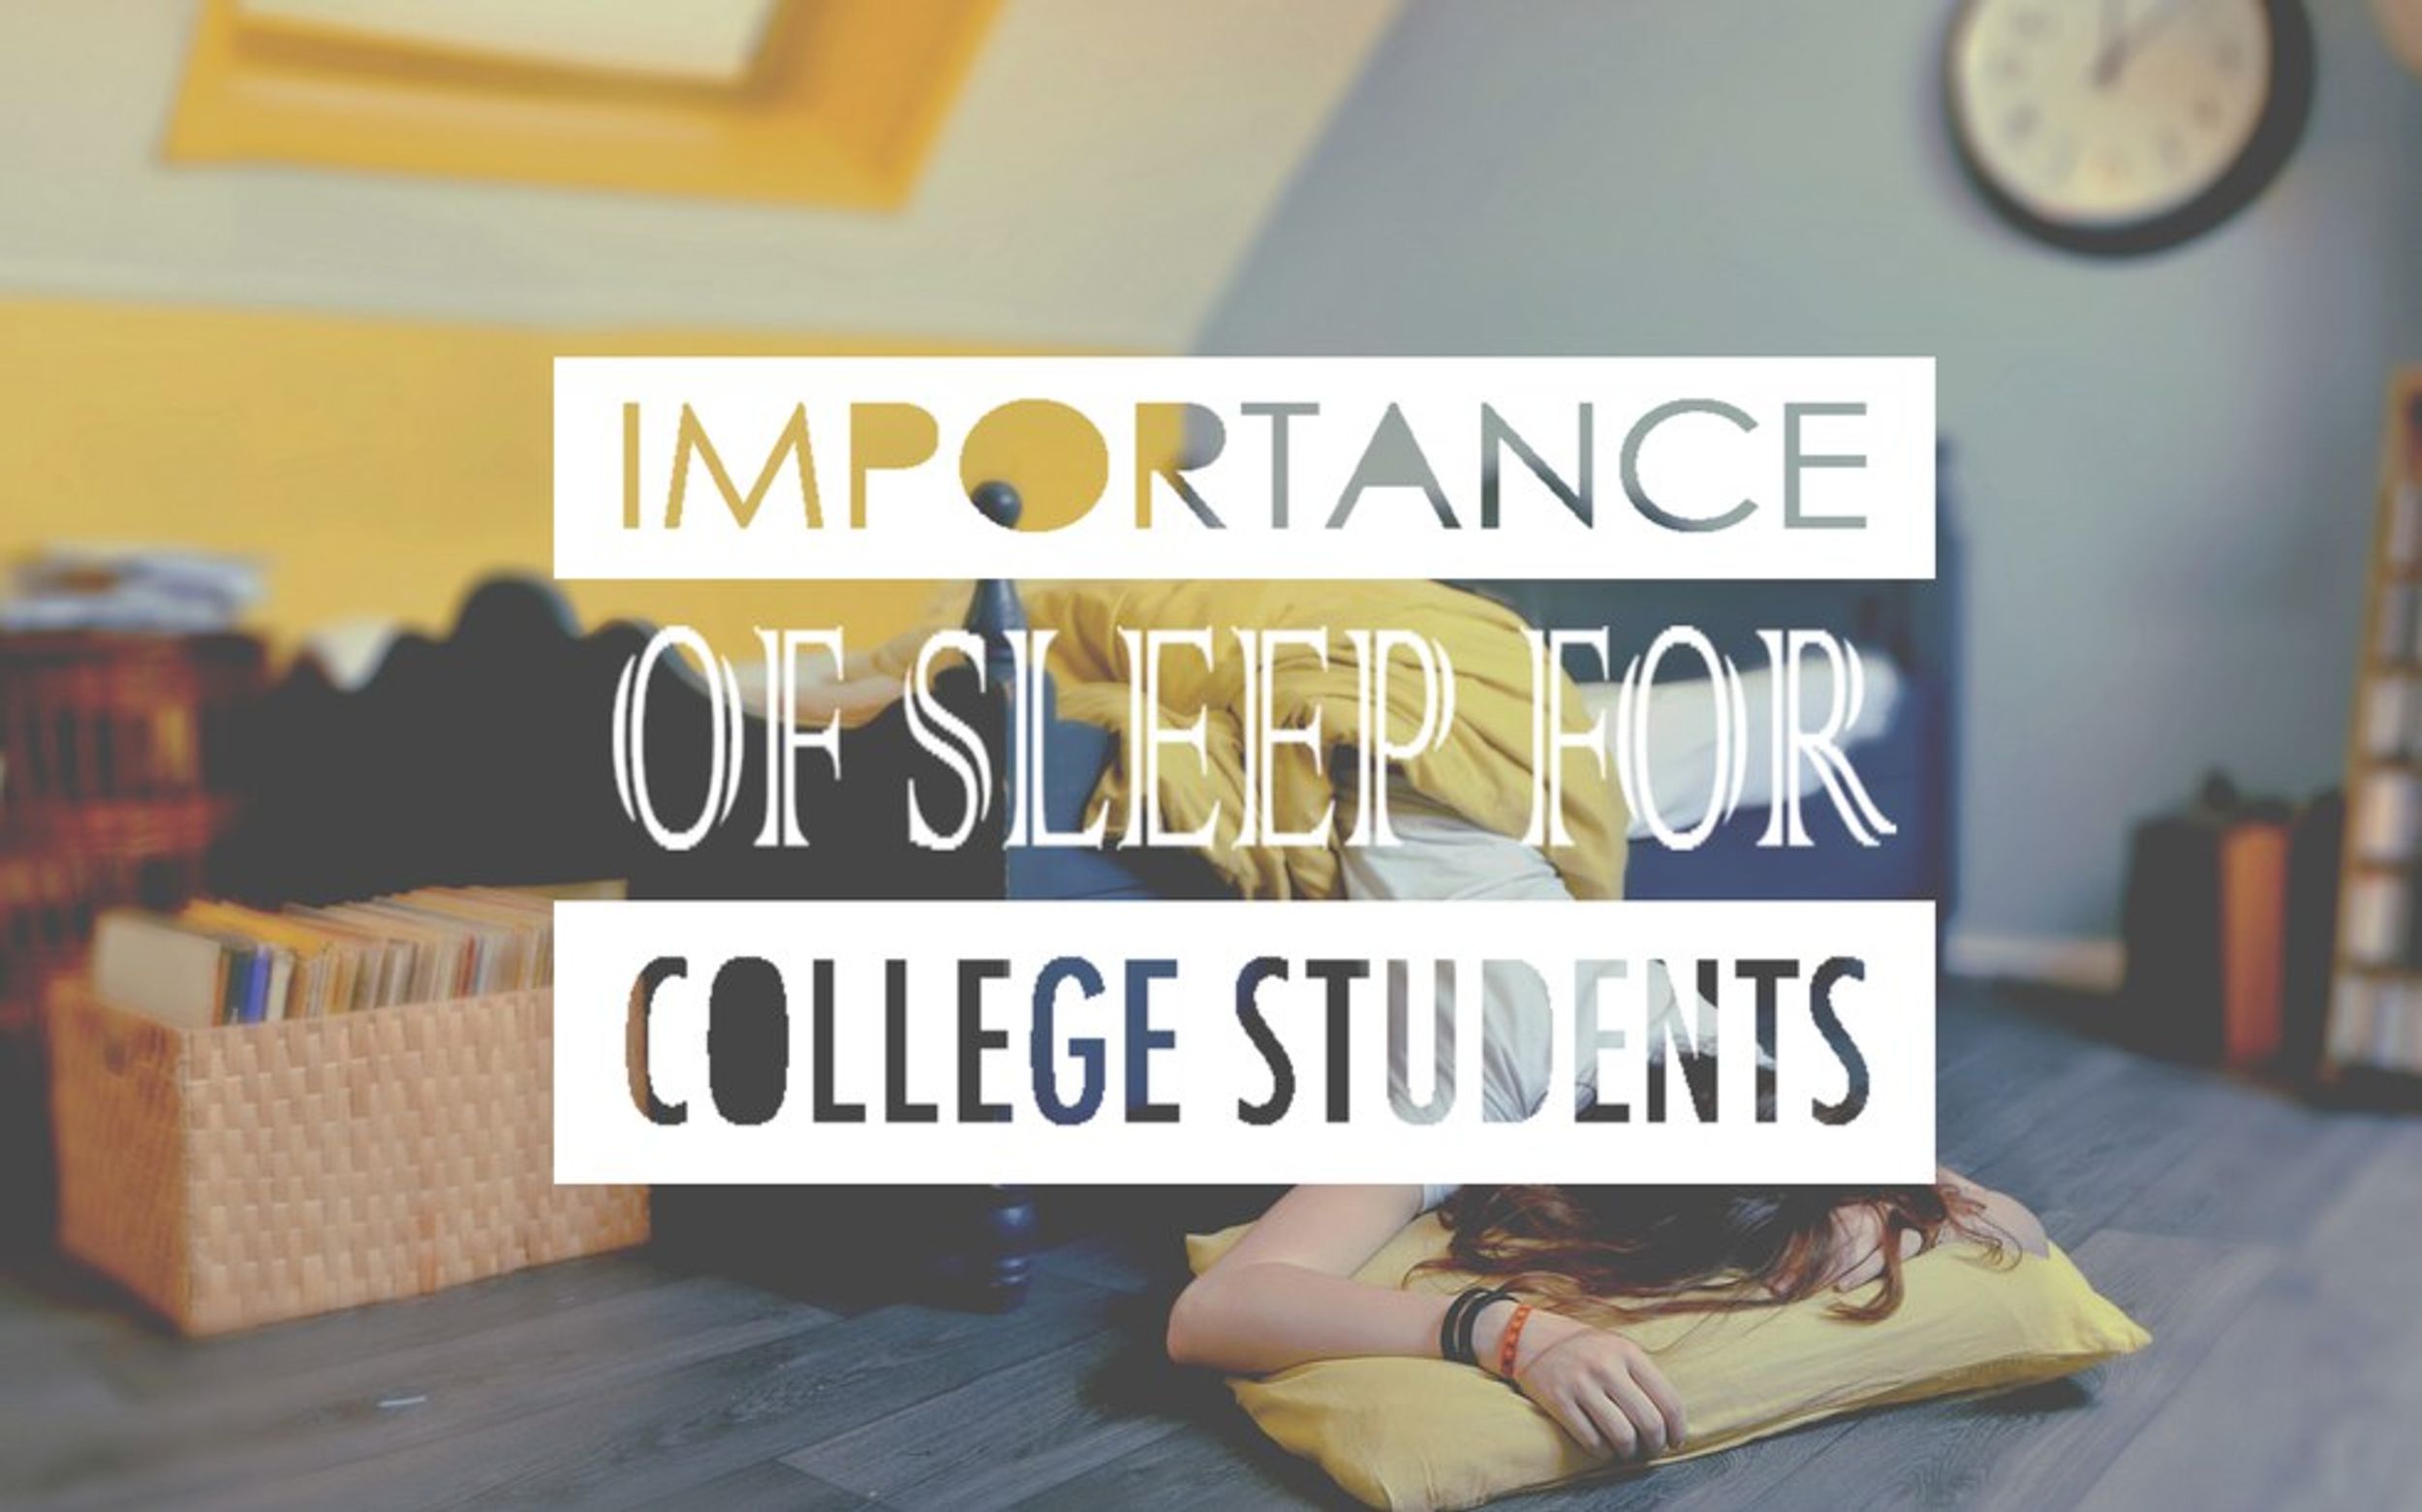 Importance Of Sleep For College Students